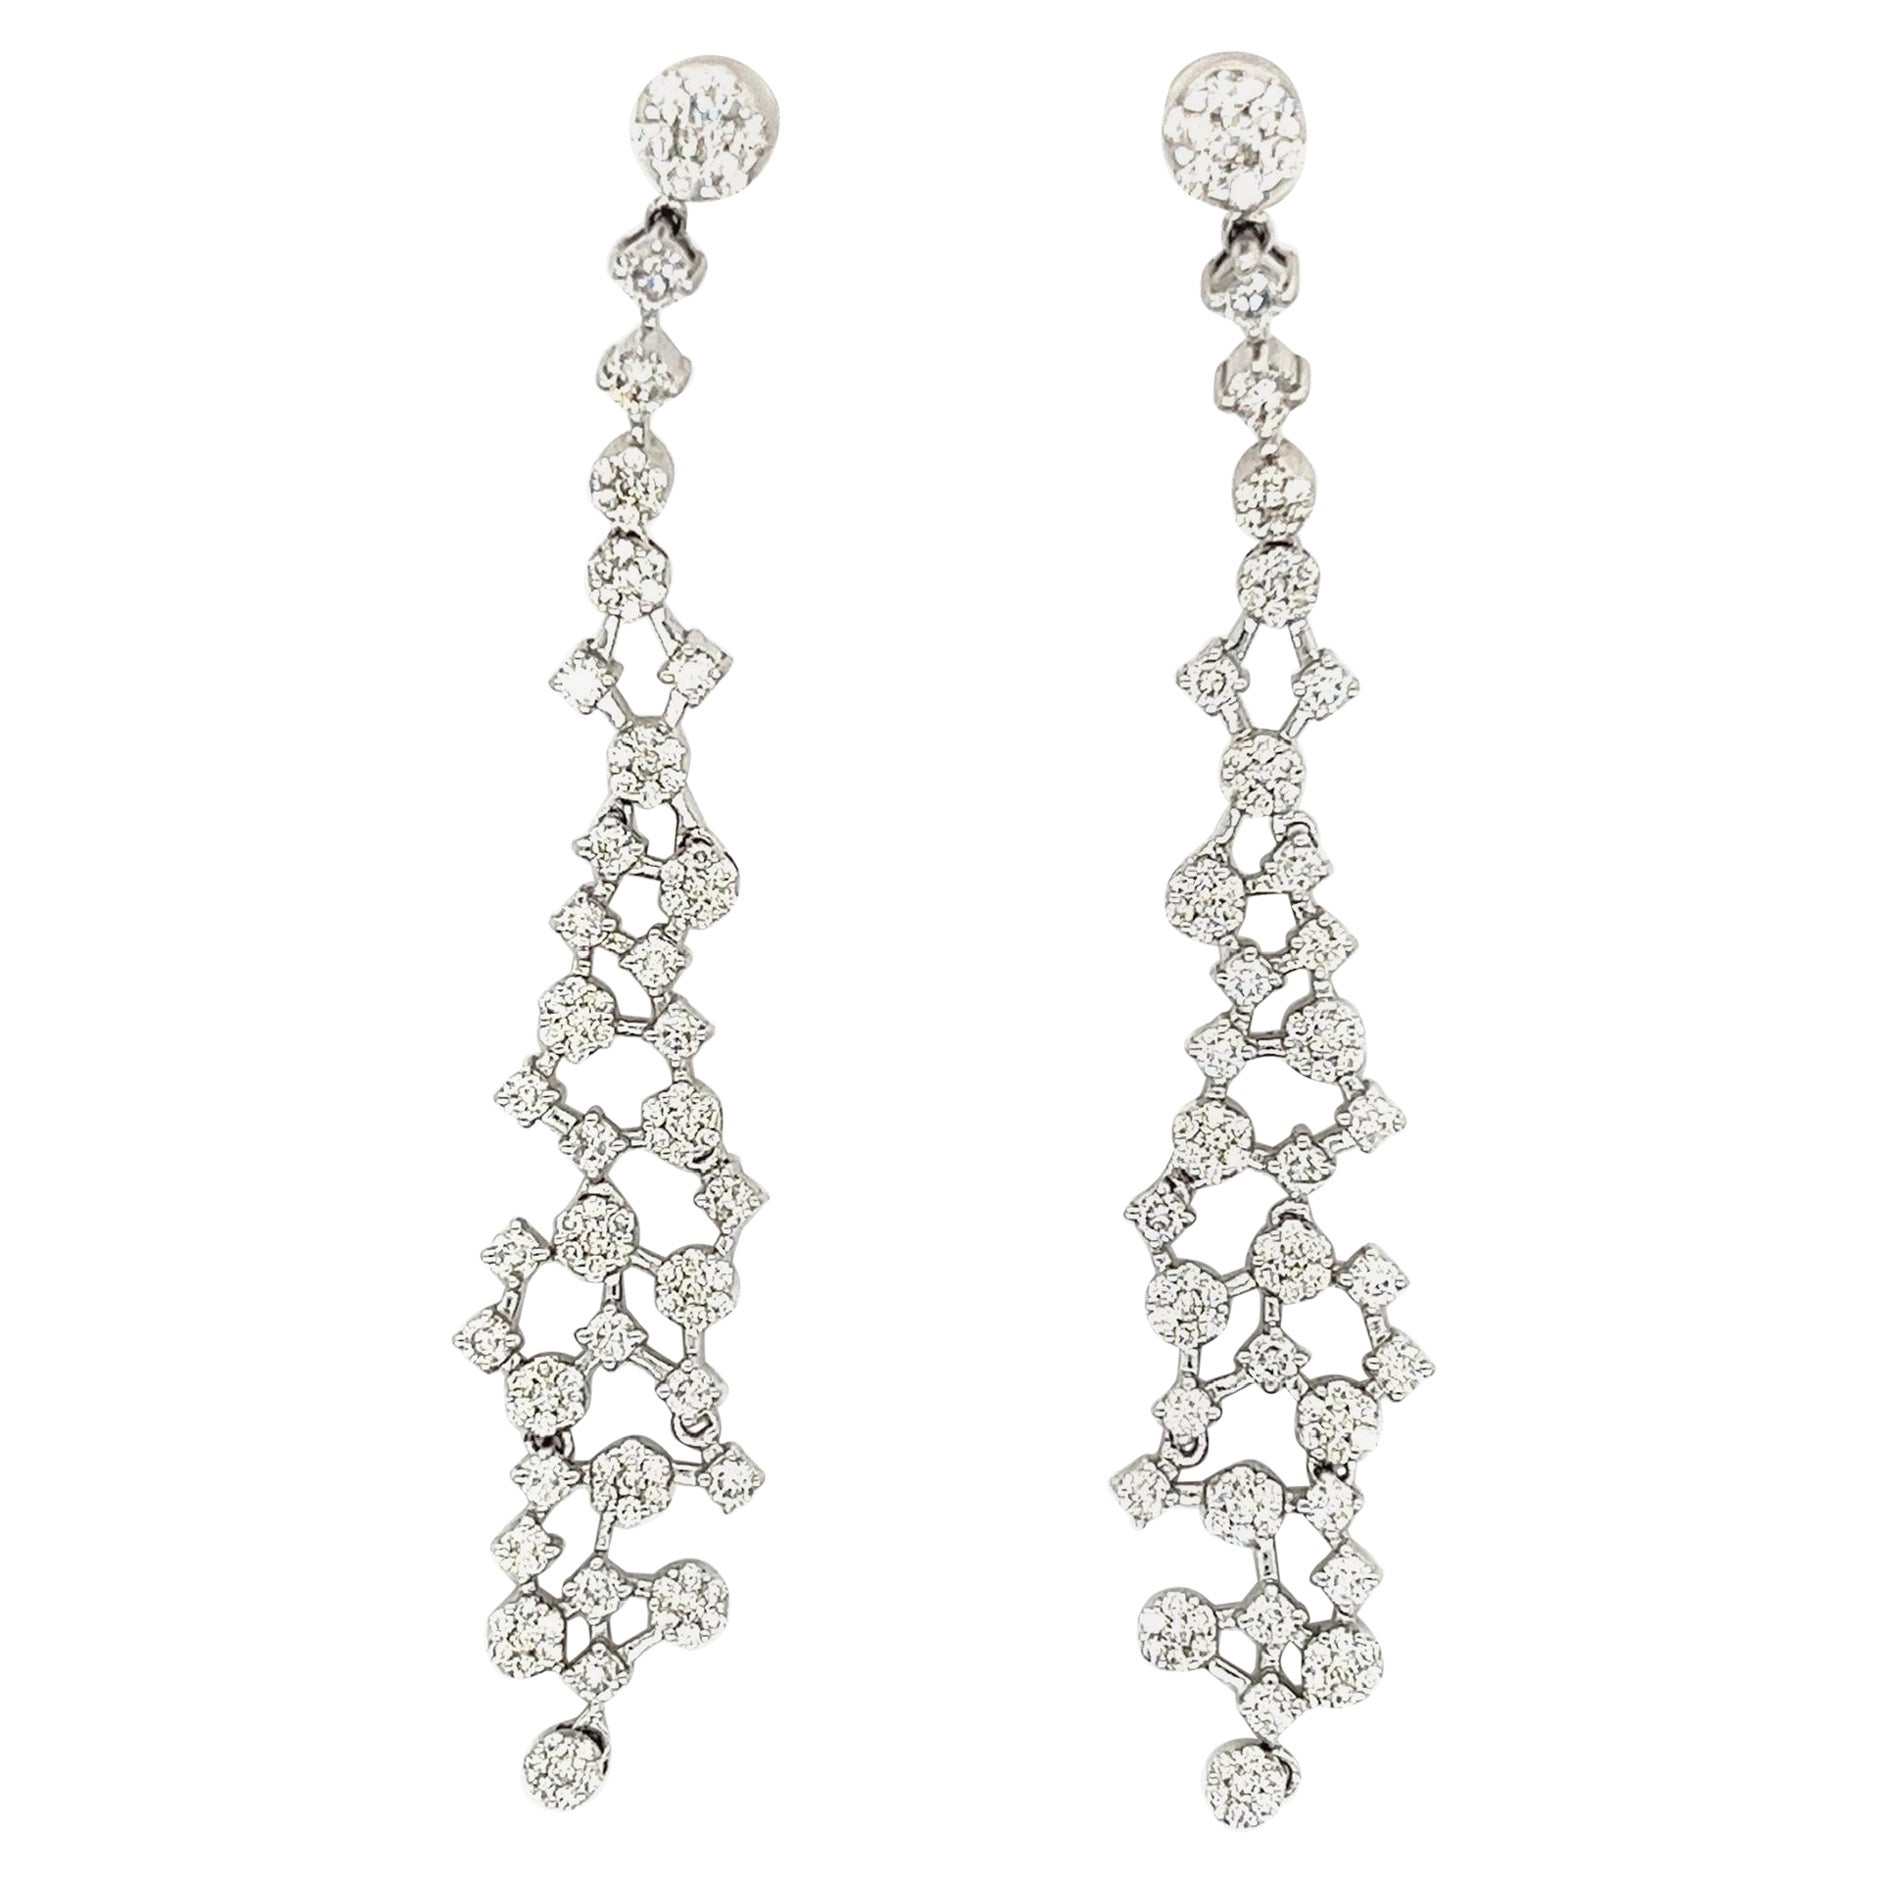 18K White Gold Earrings with Diamonds